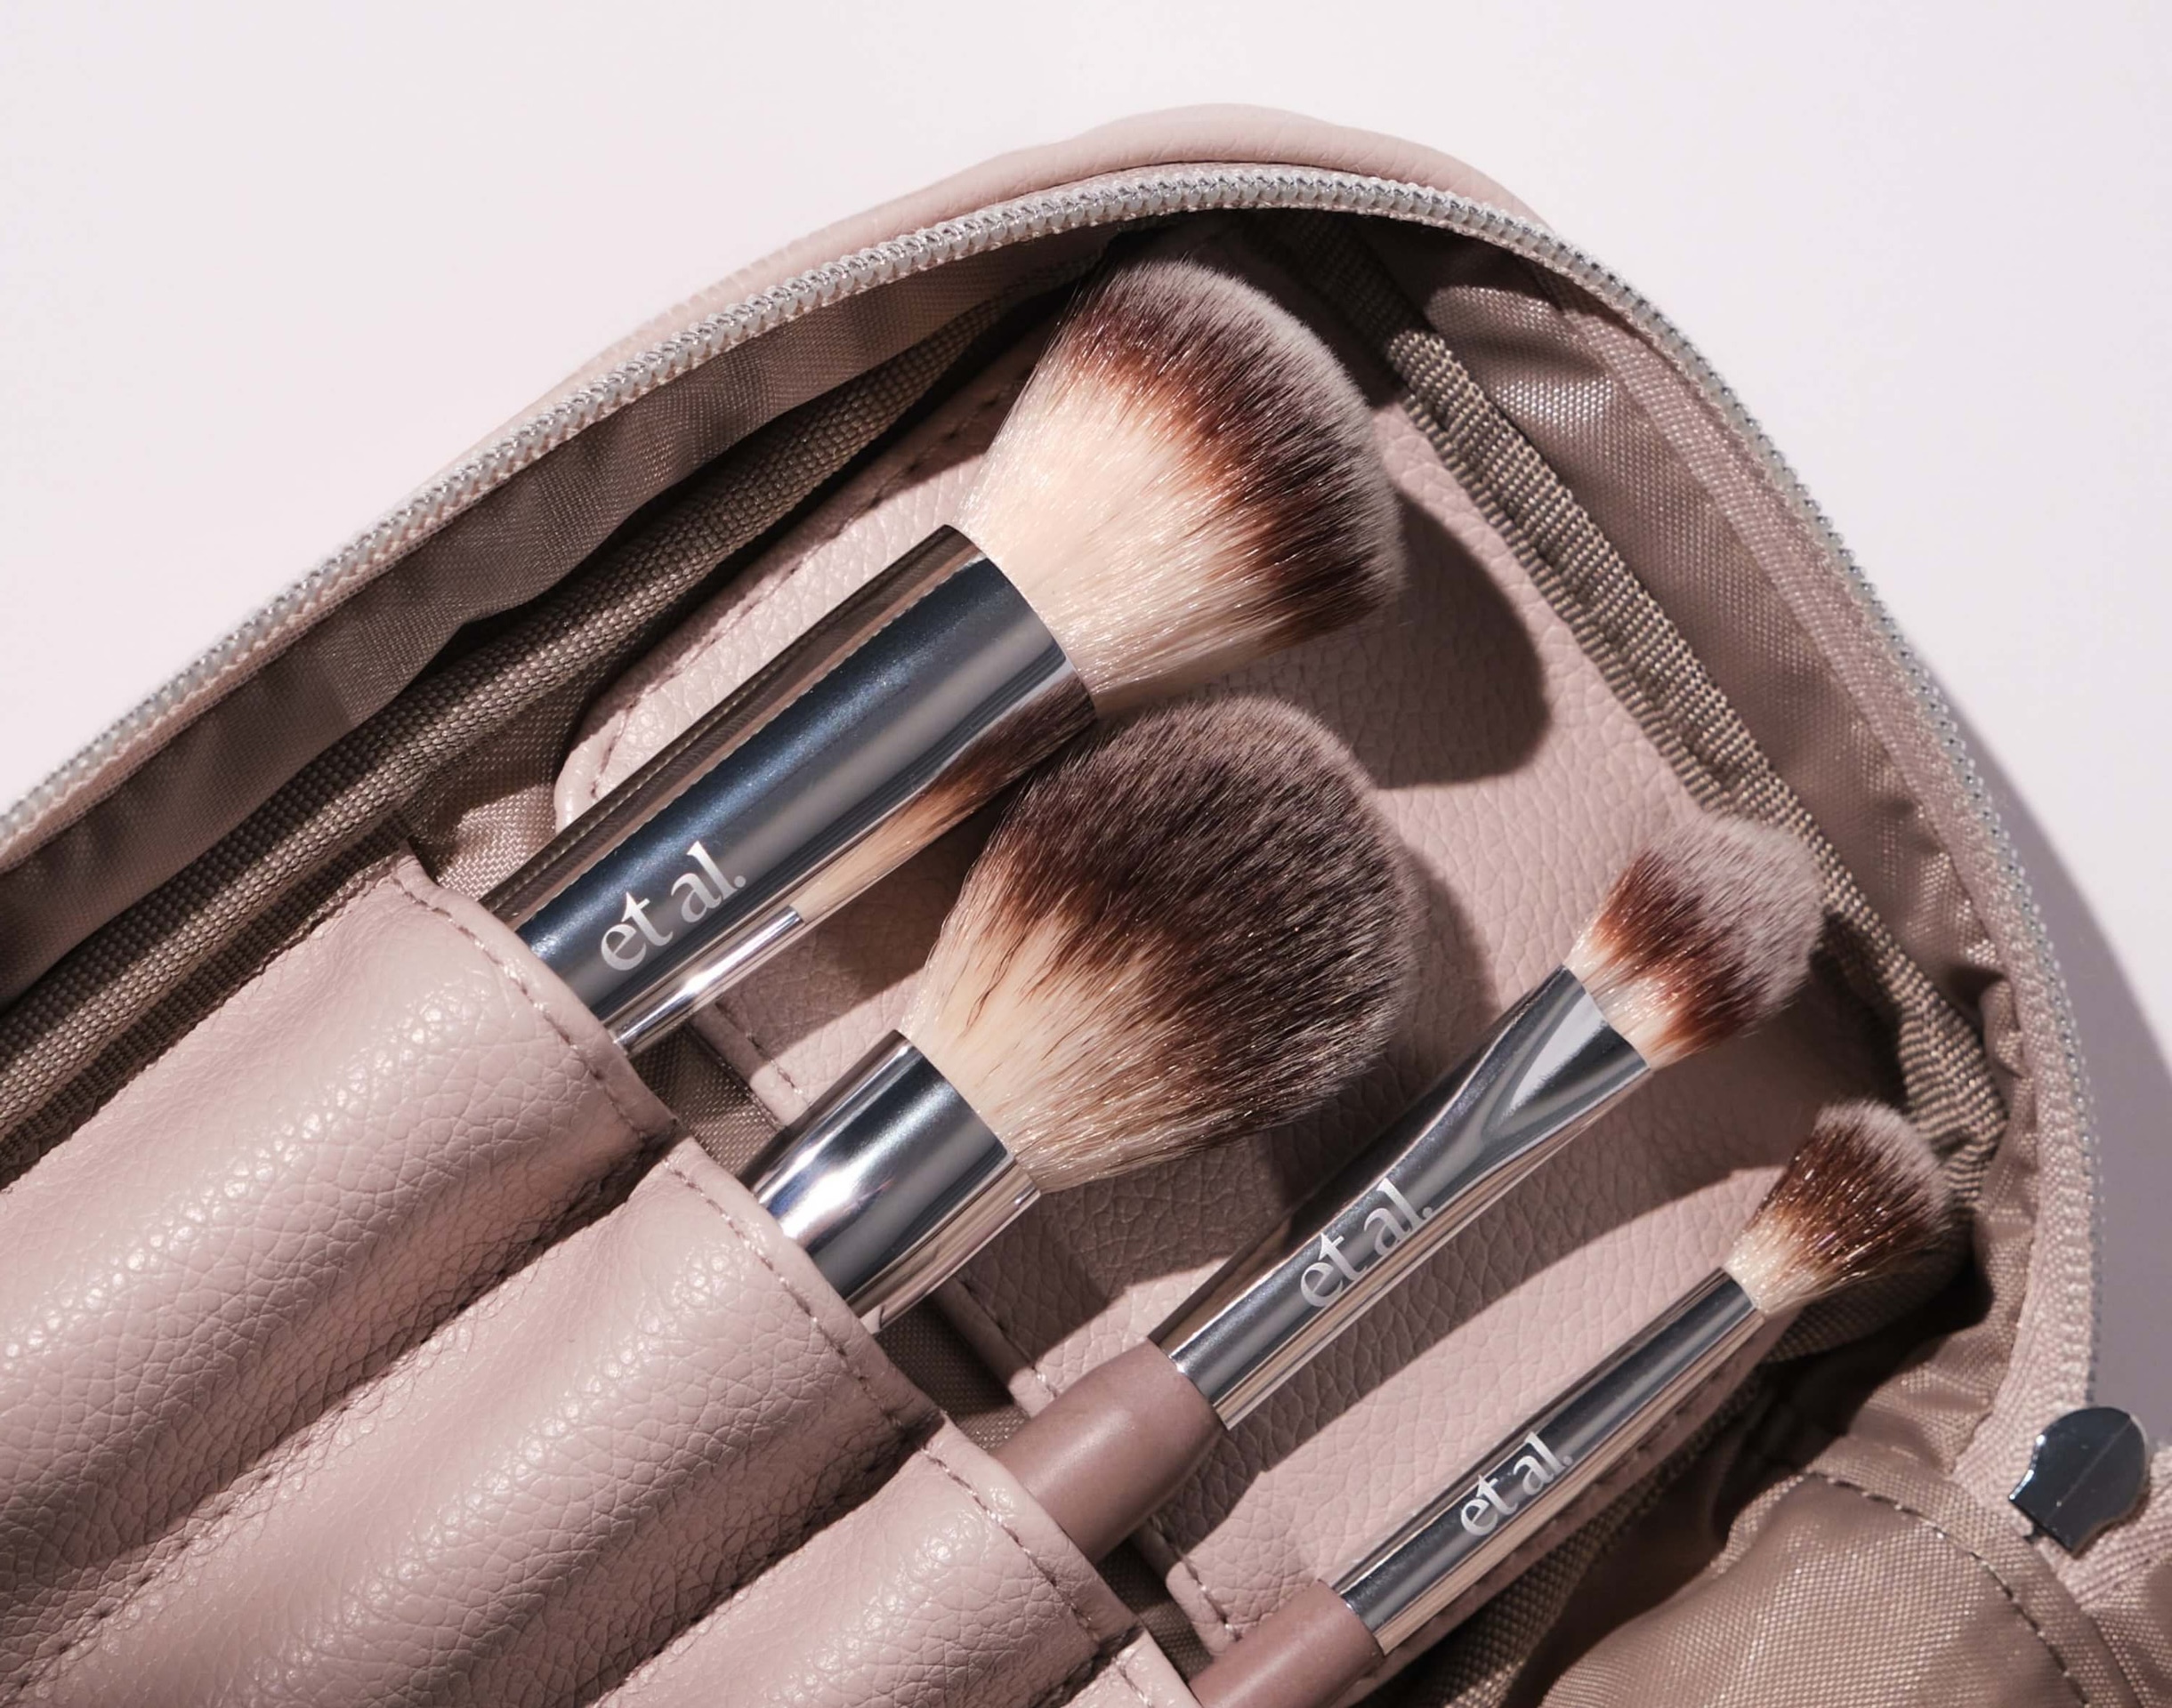 Limited edition brush collection by Et Al 